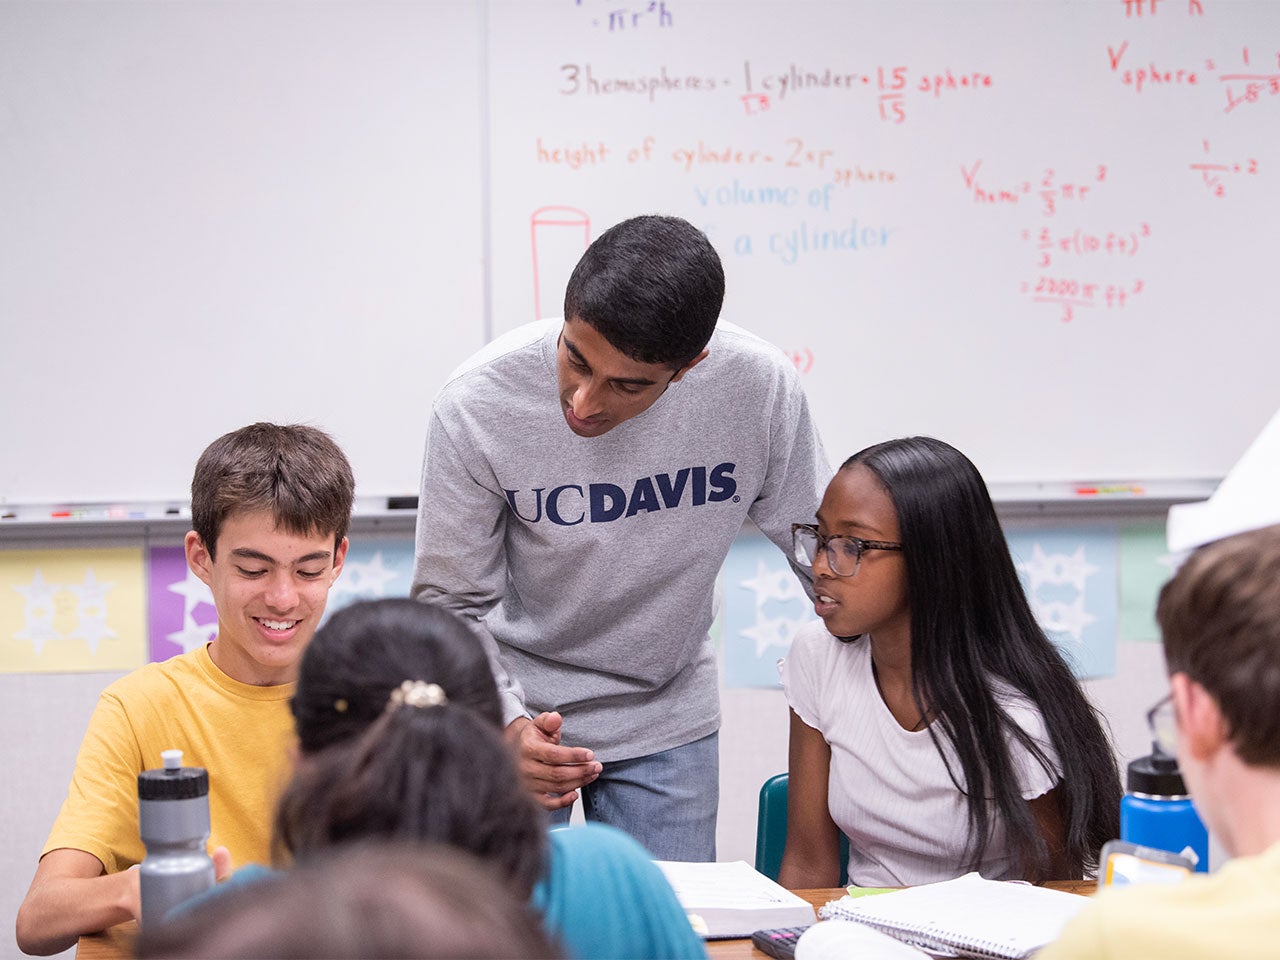 A student wearing a light gray long-sleeve UC Davis shirt leans down to assist two junior high school students. In the background is a large whiteboard with equations written on it.